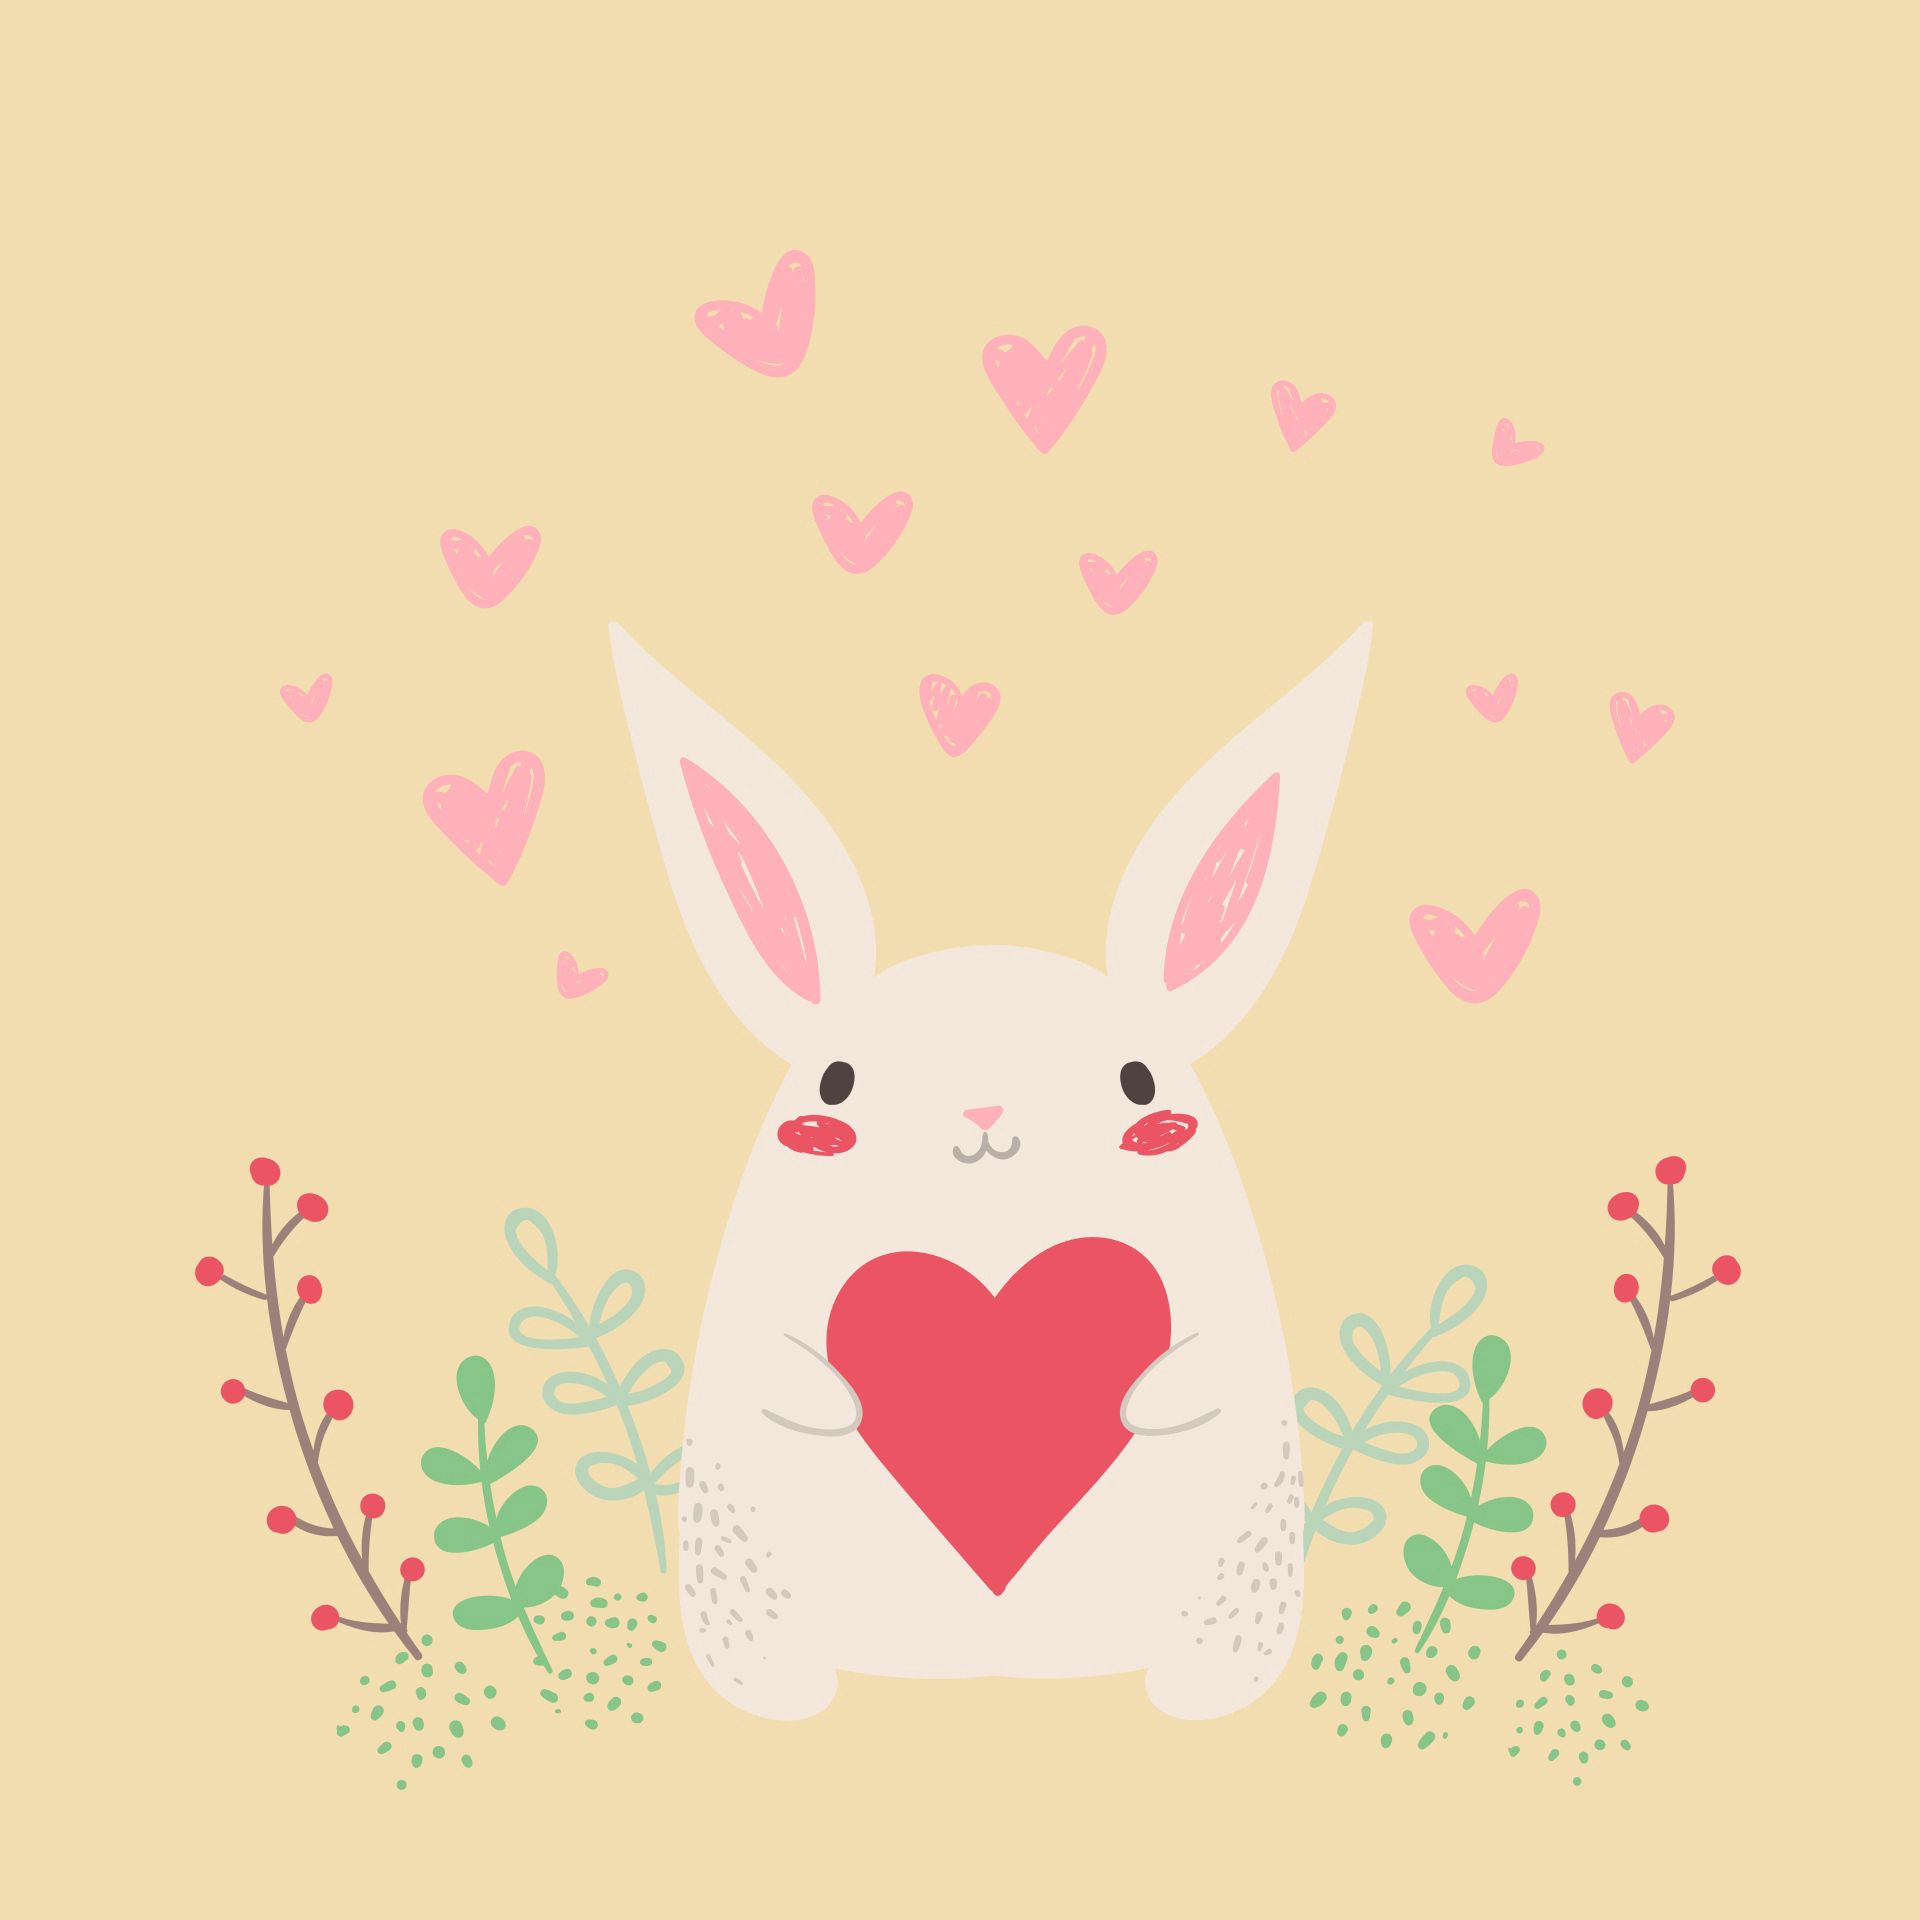 66295 Screensavers and Wallpapers Rabbit for phone. Download art, love, nice, sweetheart, heart, rabbit, hare pictures for free